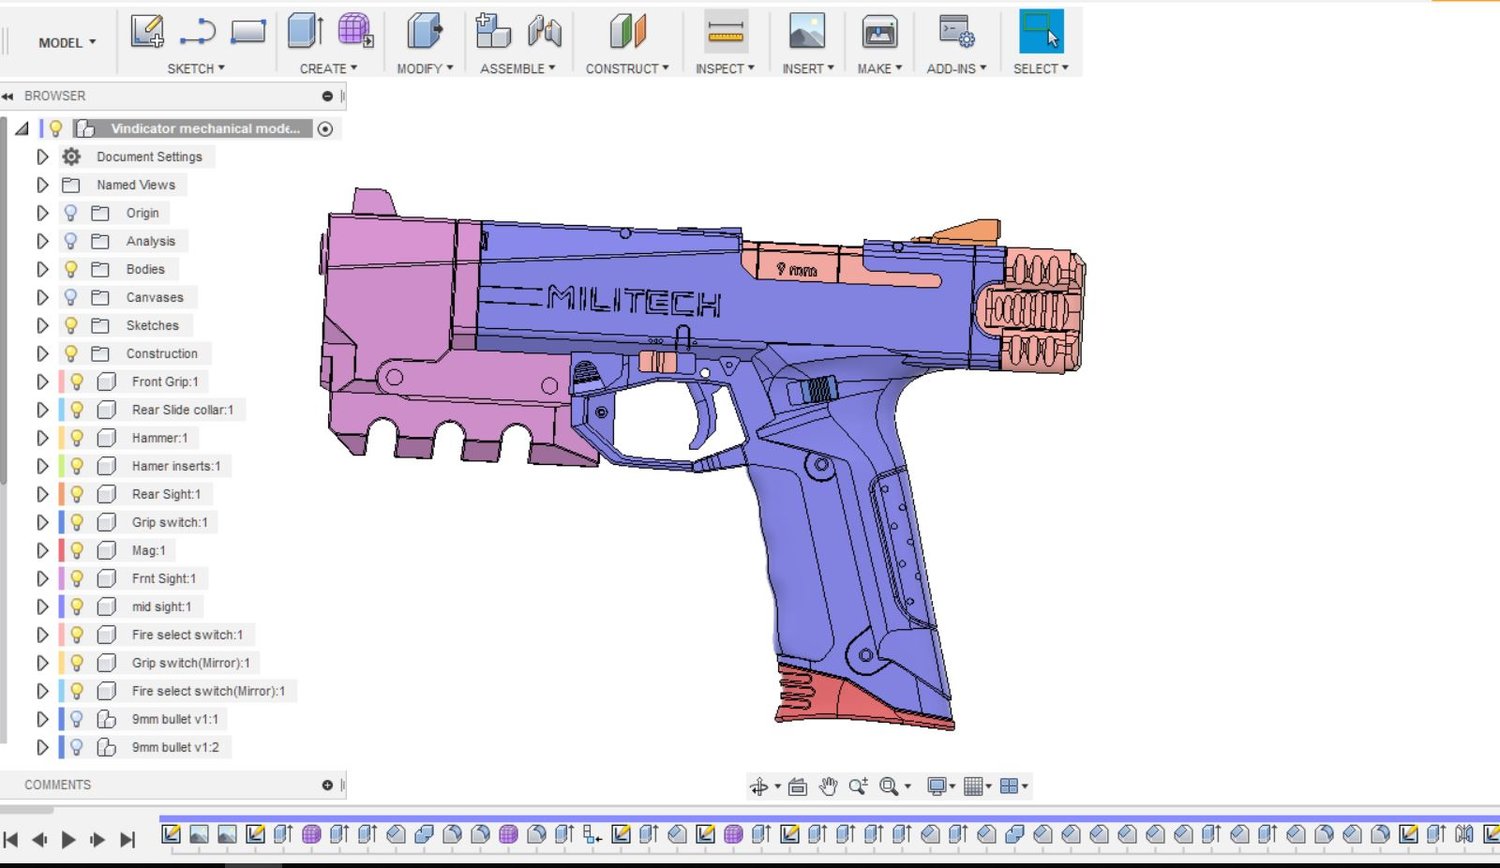 FREE: Federated Arms 'Vindicator', Cyberpunk 3D Print Files Further Fabrication